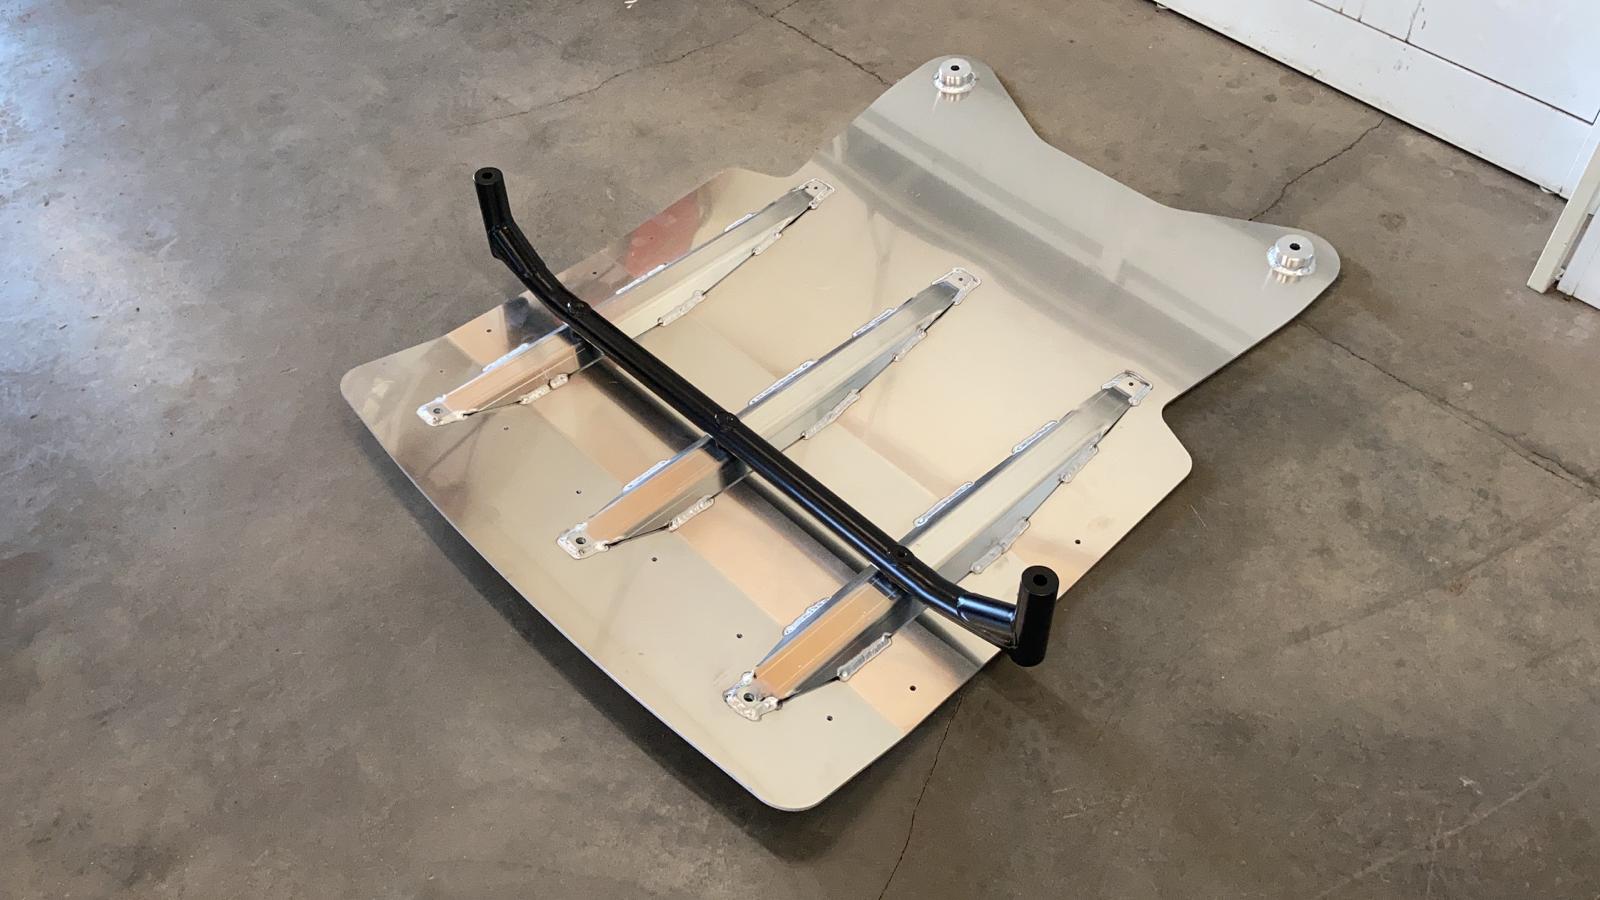 Gr Yaris skid plate with support bar